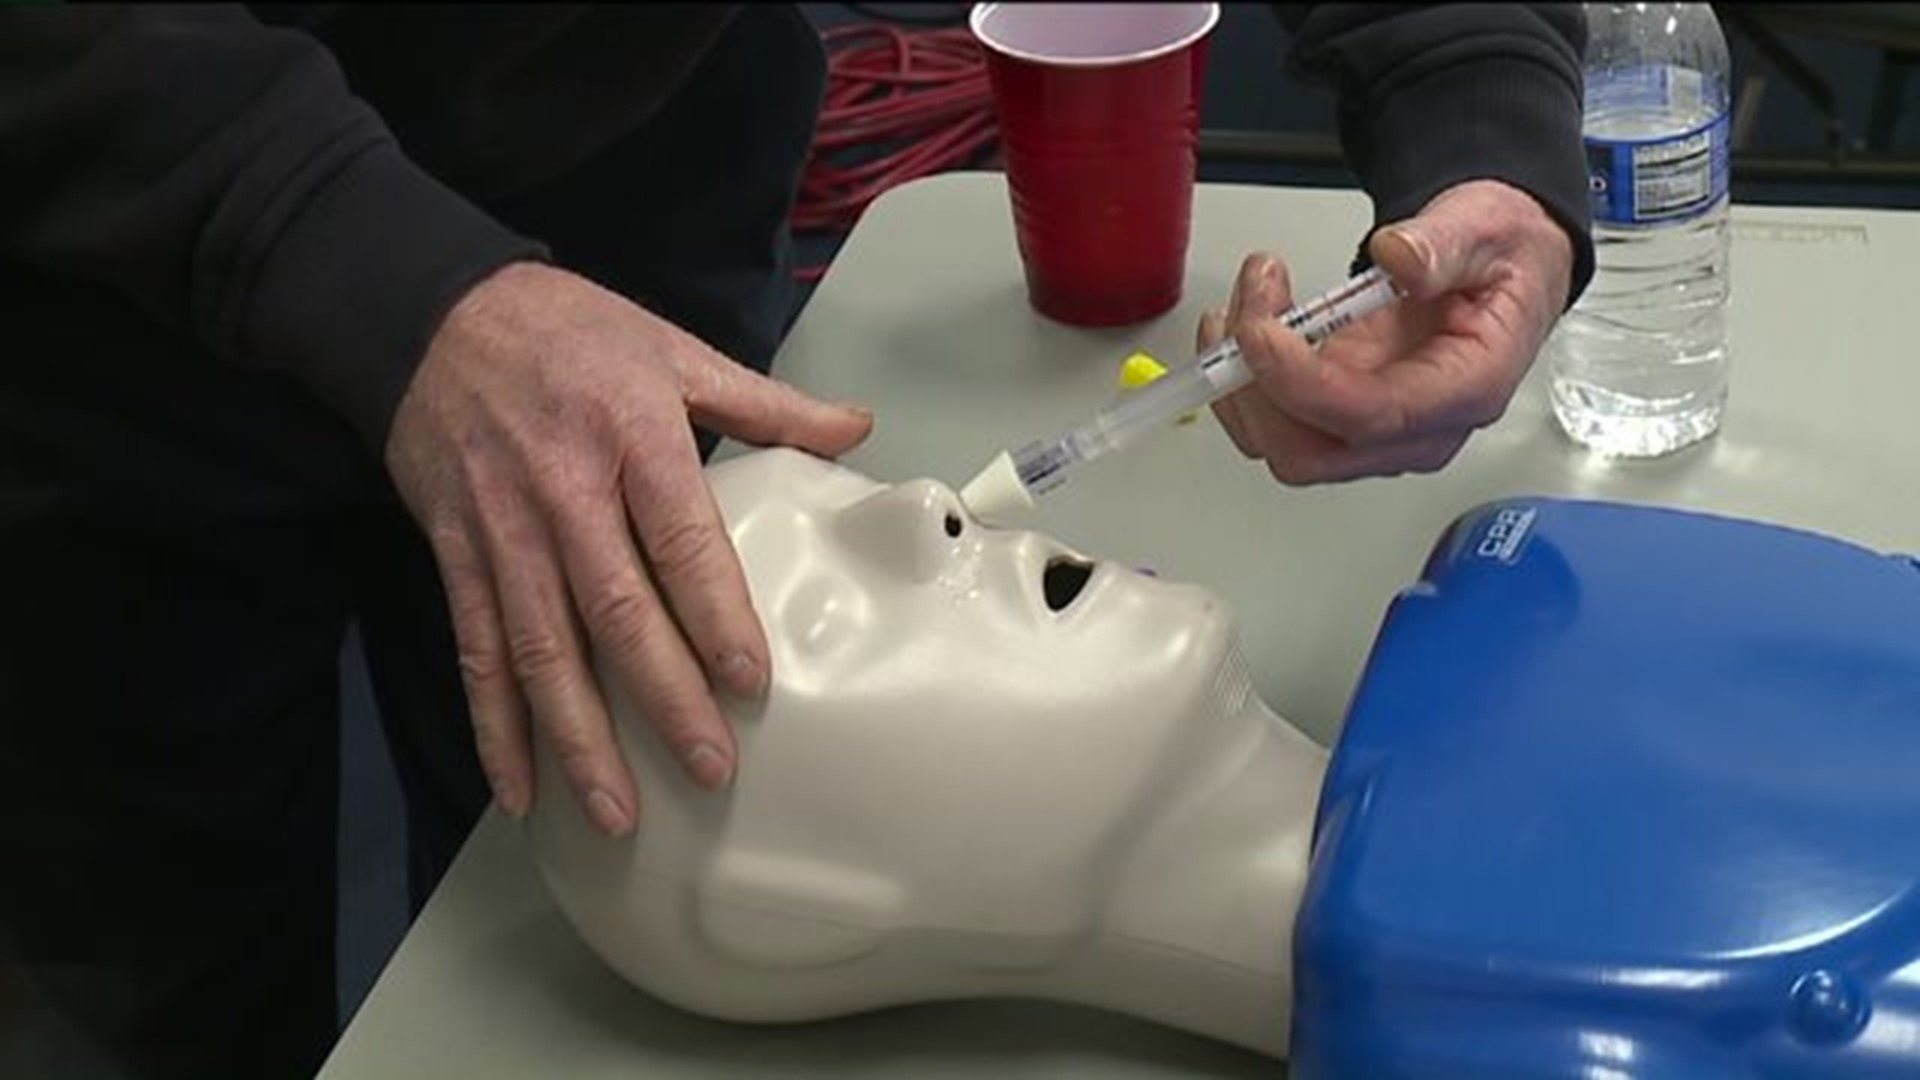 Firefighters Equipped with Lifesaving Drug